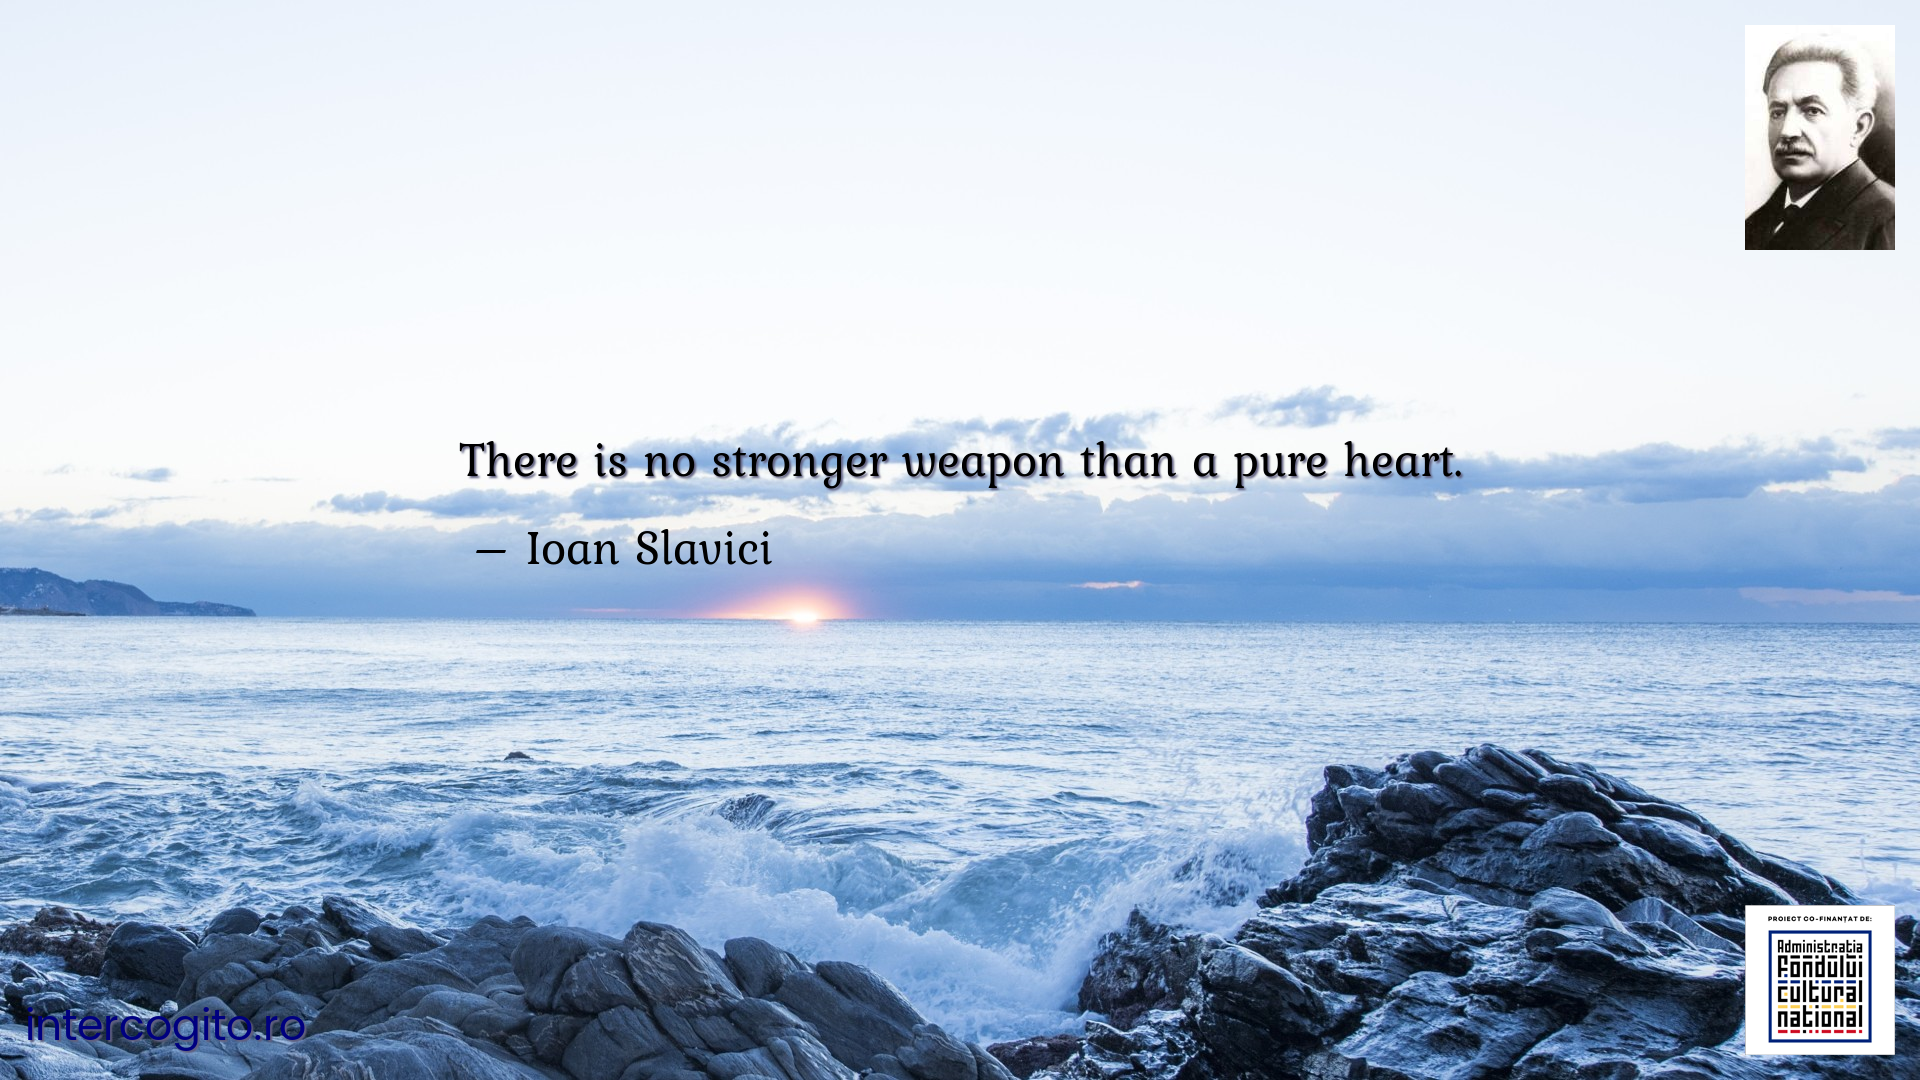 There is no stronger weapon than a pure heart.